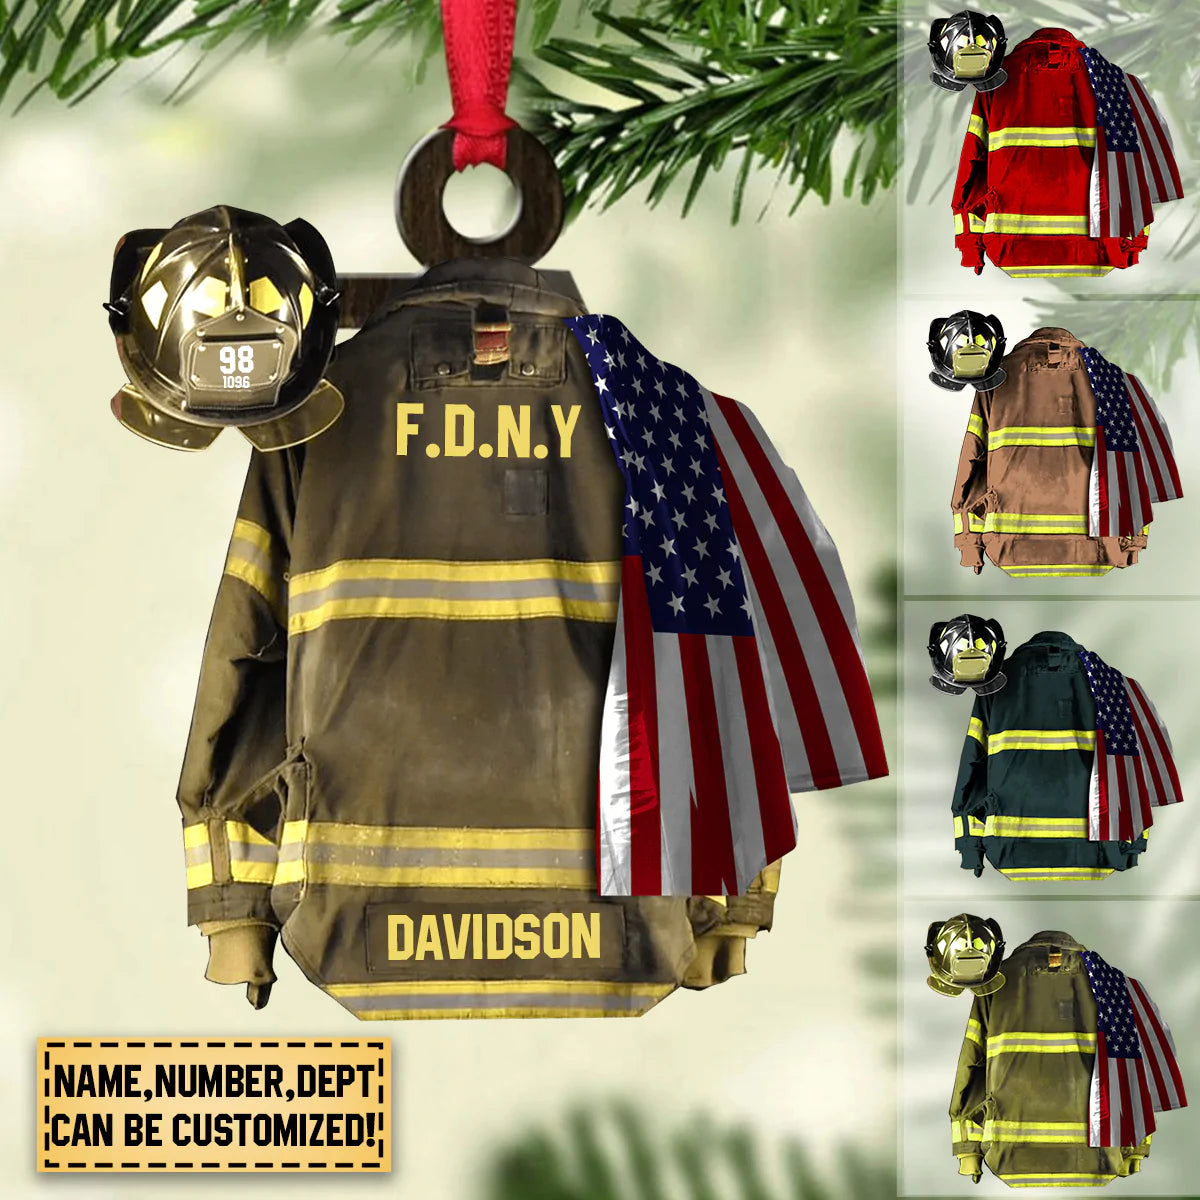 PERSONALIZED U.S FIRE DEPARTMENT HANGING ORNAMENT